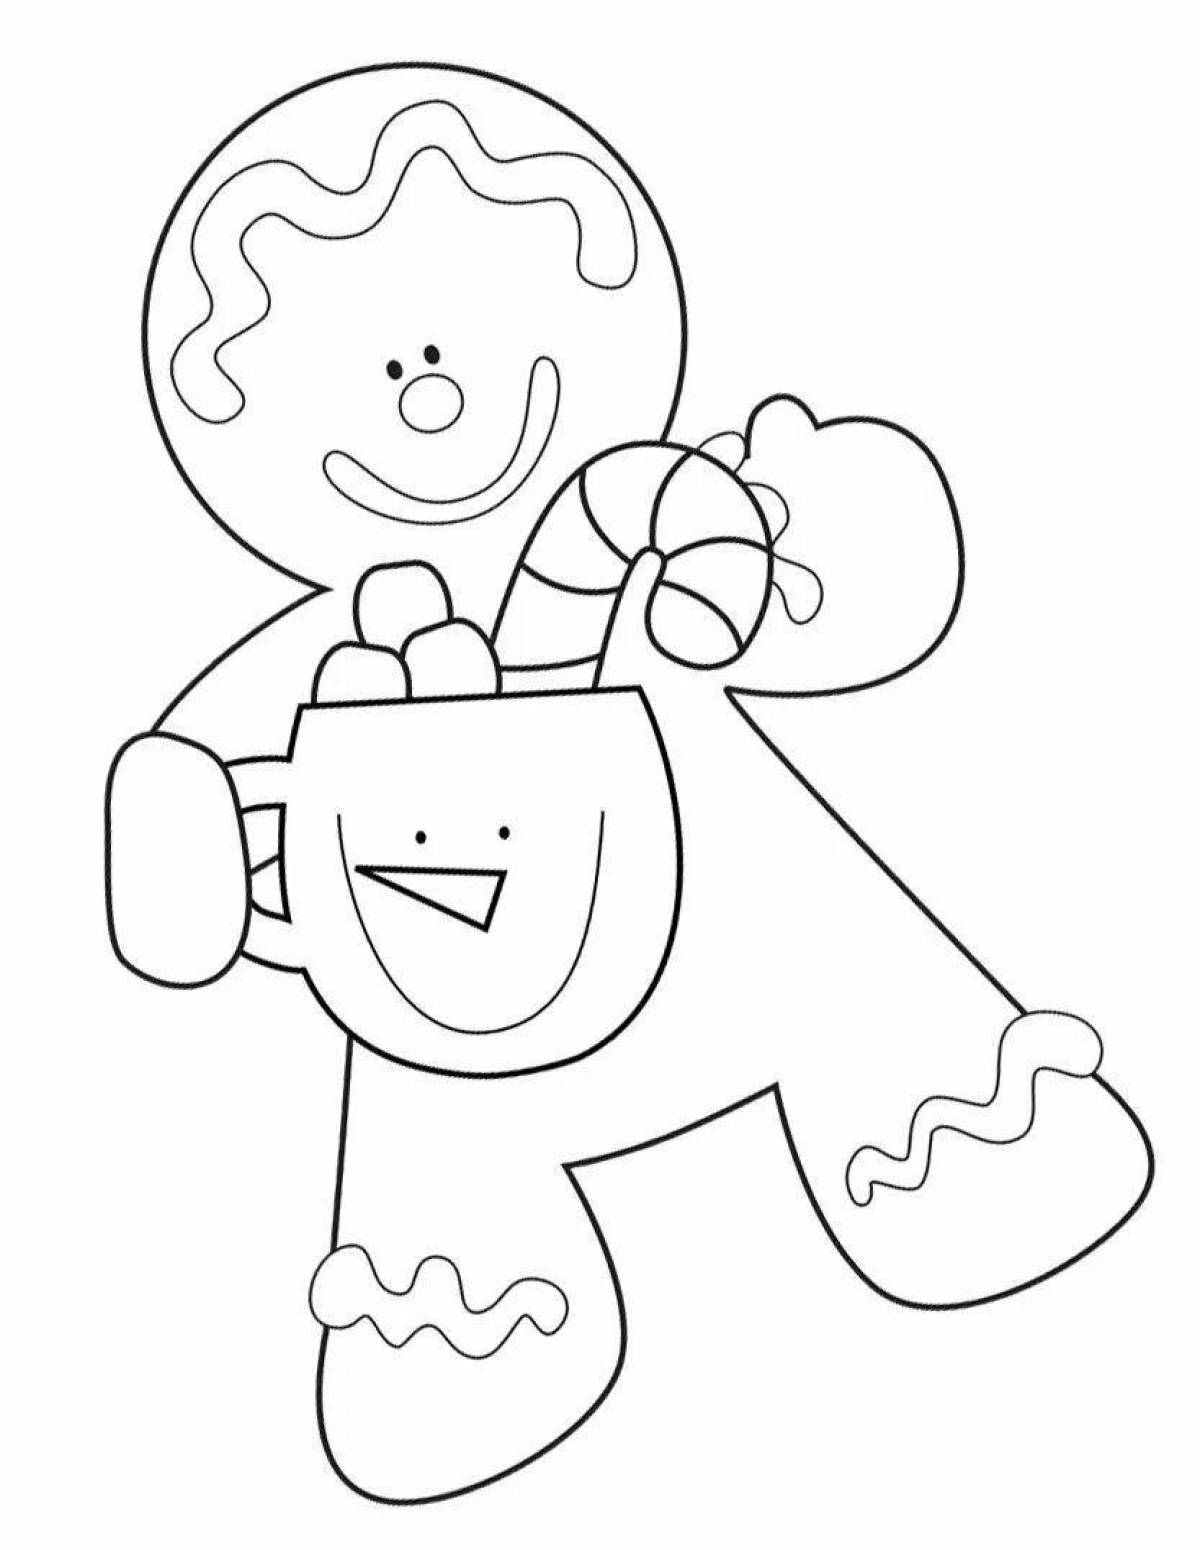 Coloring page funny gingerbread